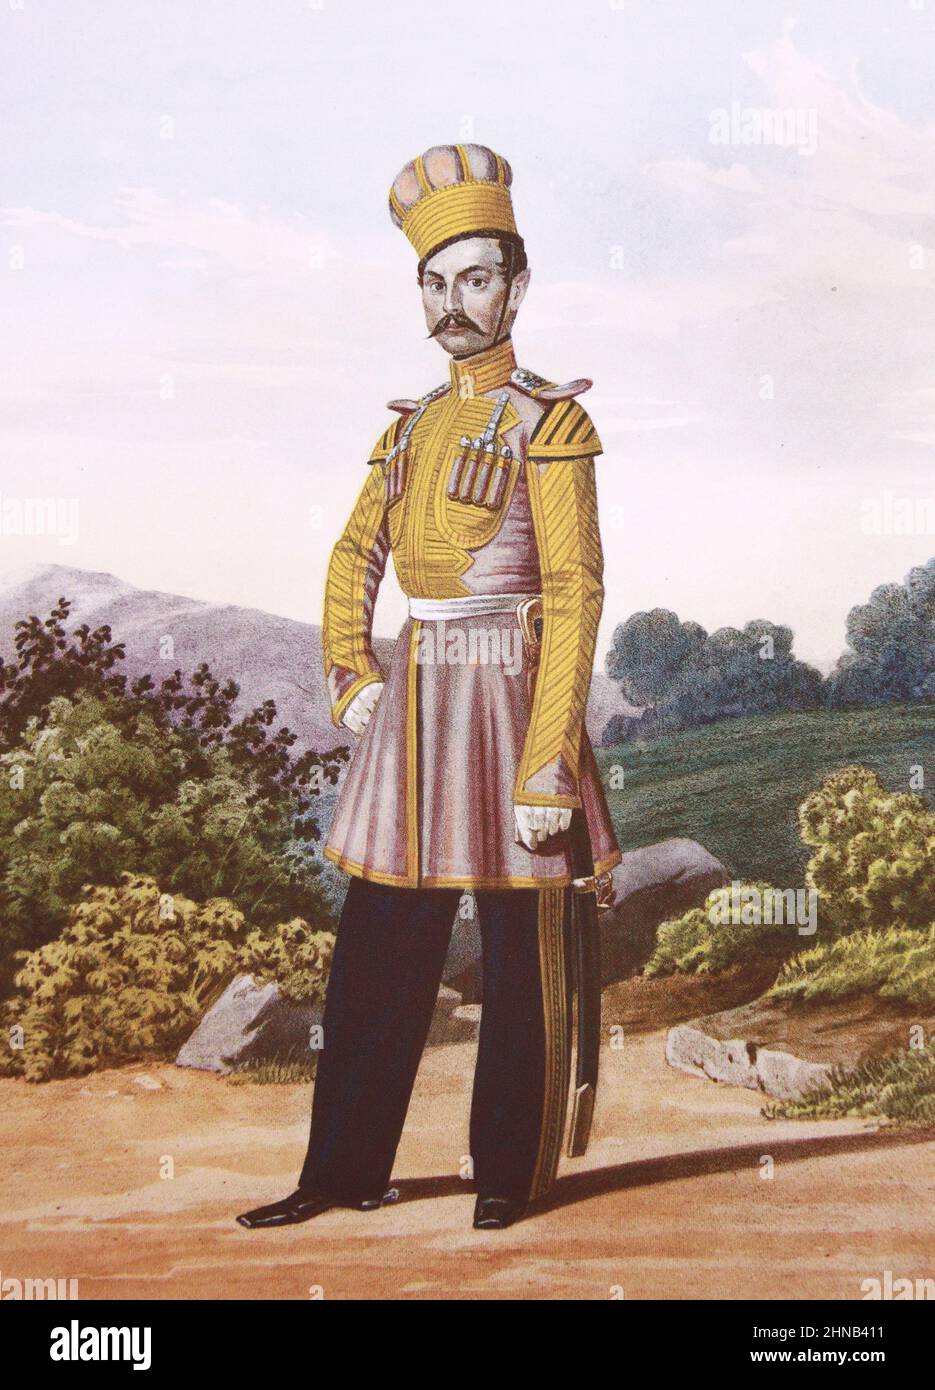 Trumpeter of the Life Guards of the Crimean Tatar squadron in 1845-1855. Lithograph of the 19th century. Stock Photo